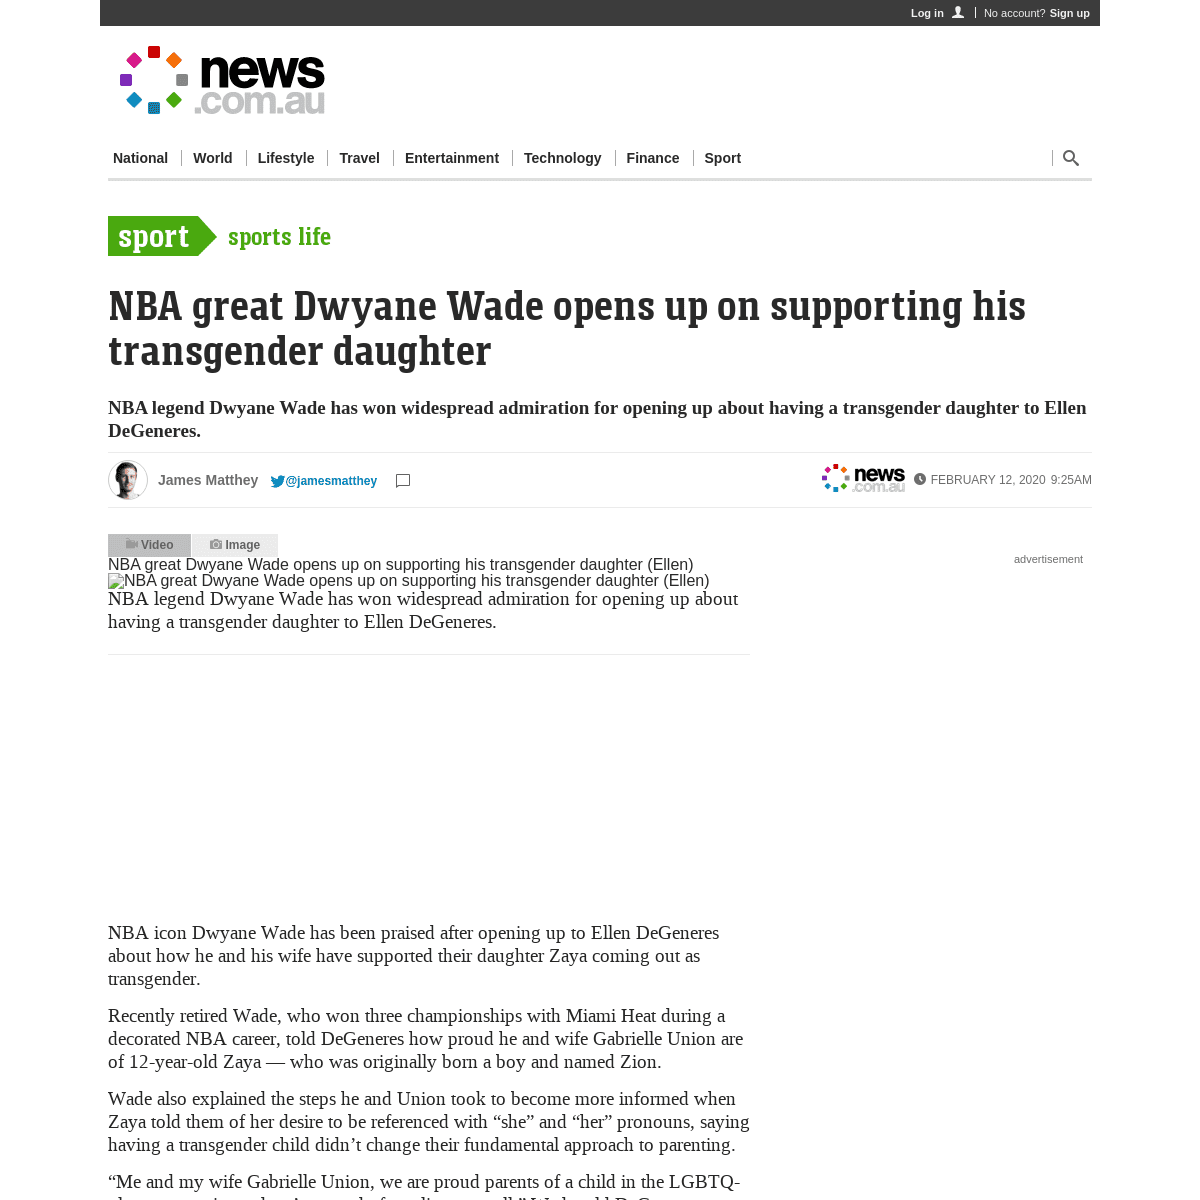 A complete backup of www.news.com.au/sport/sports-life/nba-great-dwyane-wade-opens-up-on-supporting-his-transgender-daughter/new